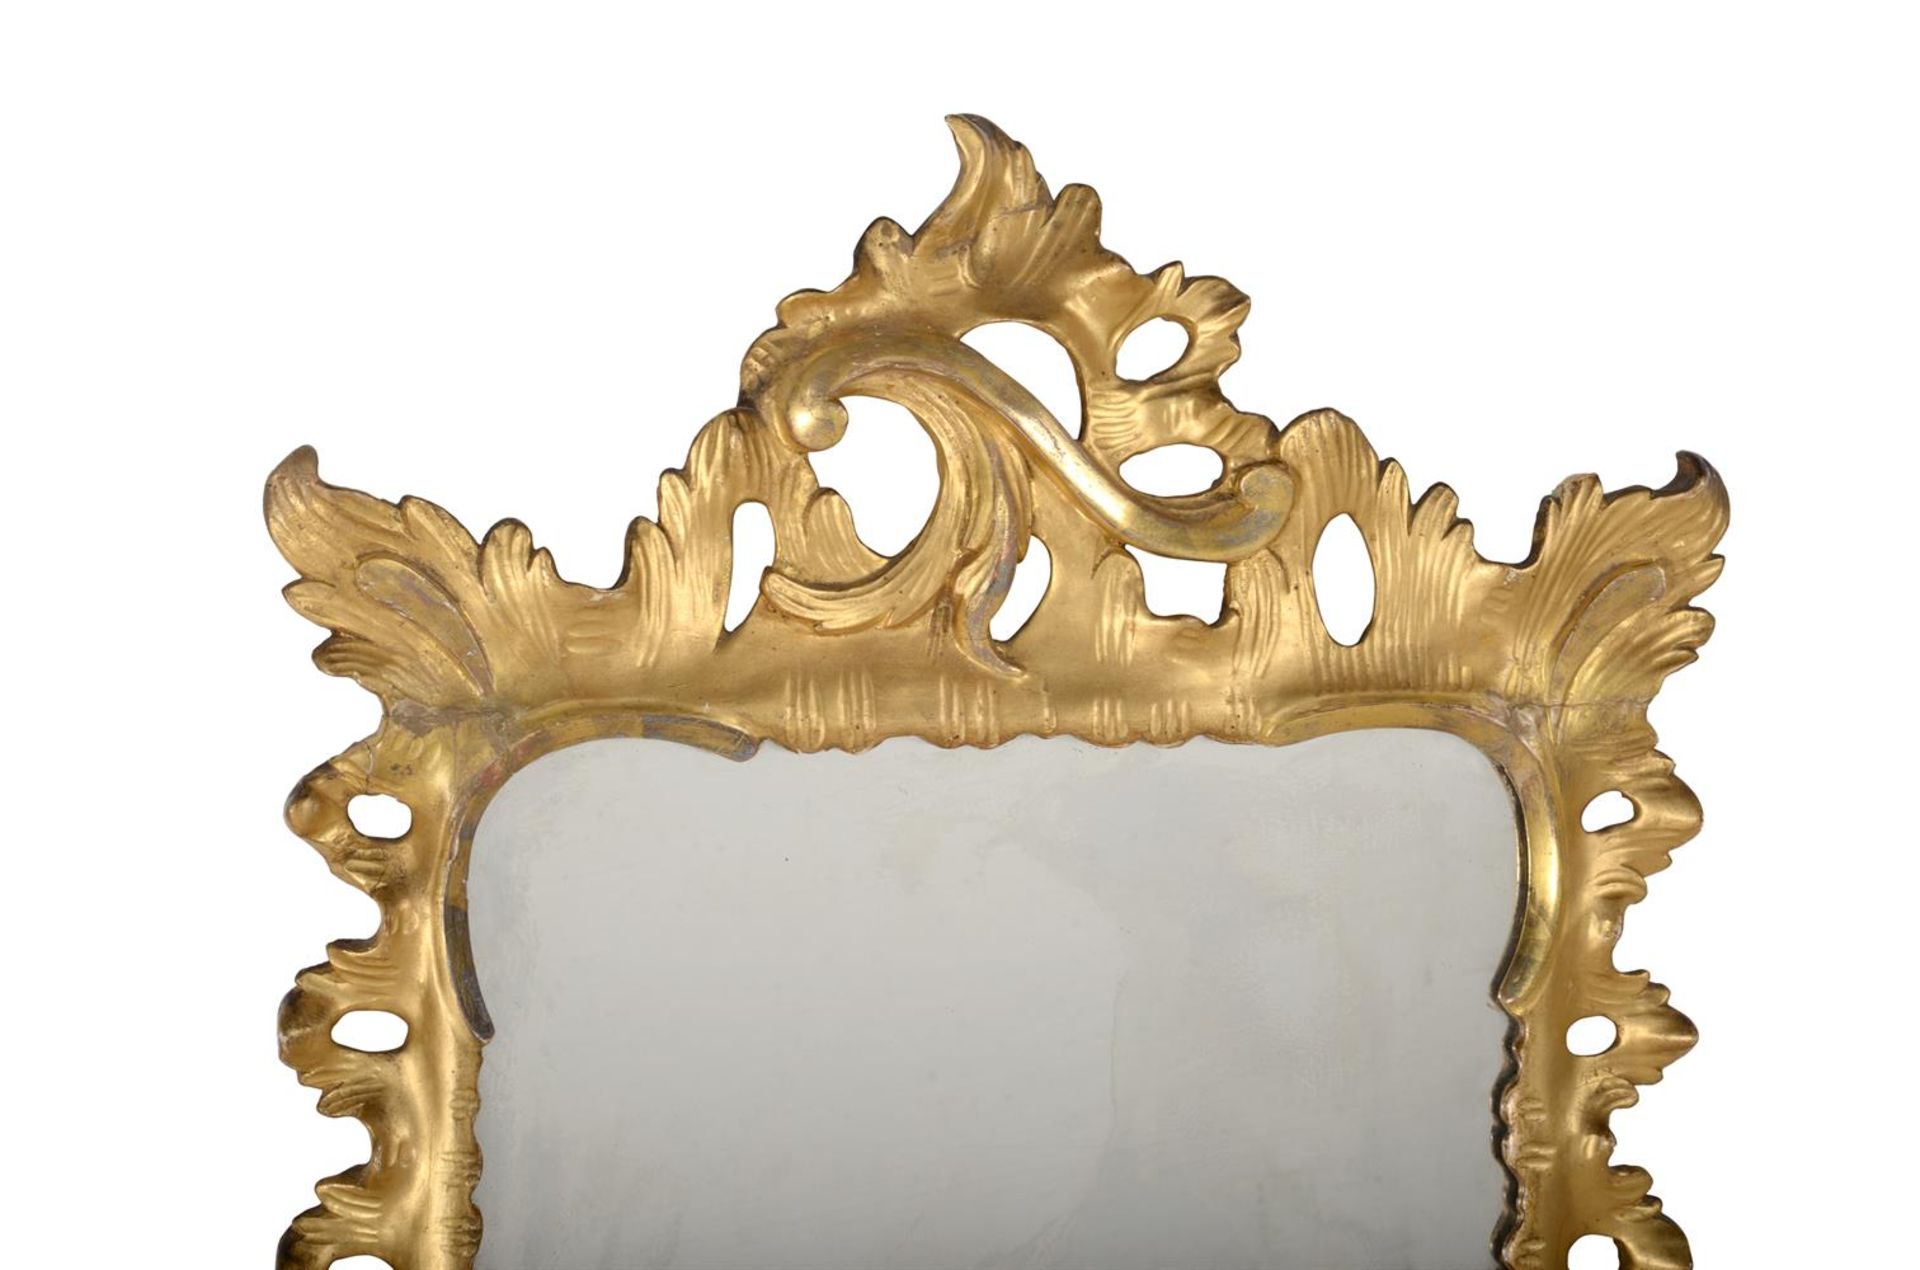 AN EARLY GEORGE III CARVED GILTWOOD WALL MIRROR, CIRCA 1760 - Image 2 of 4